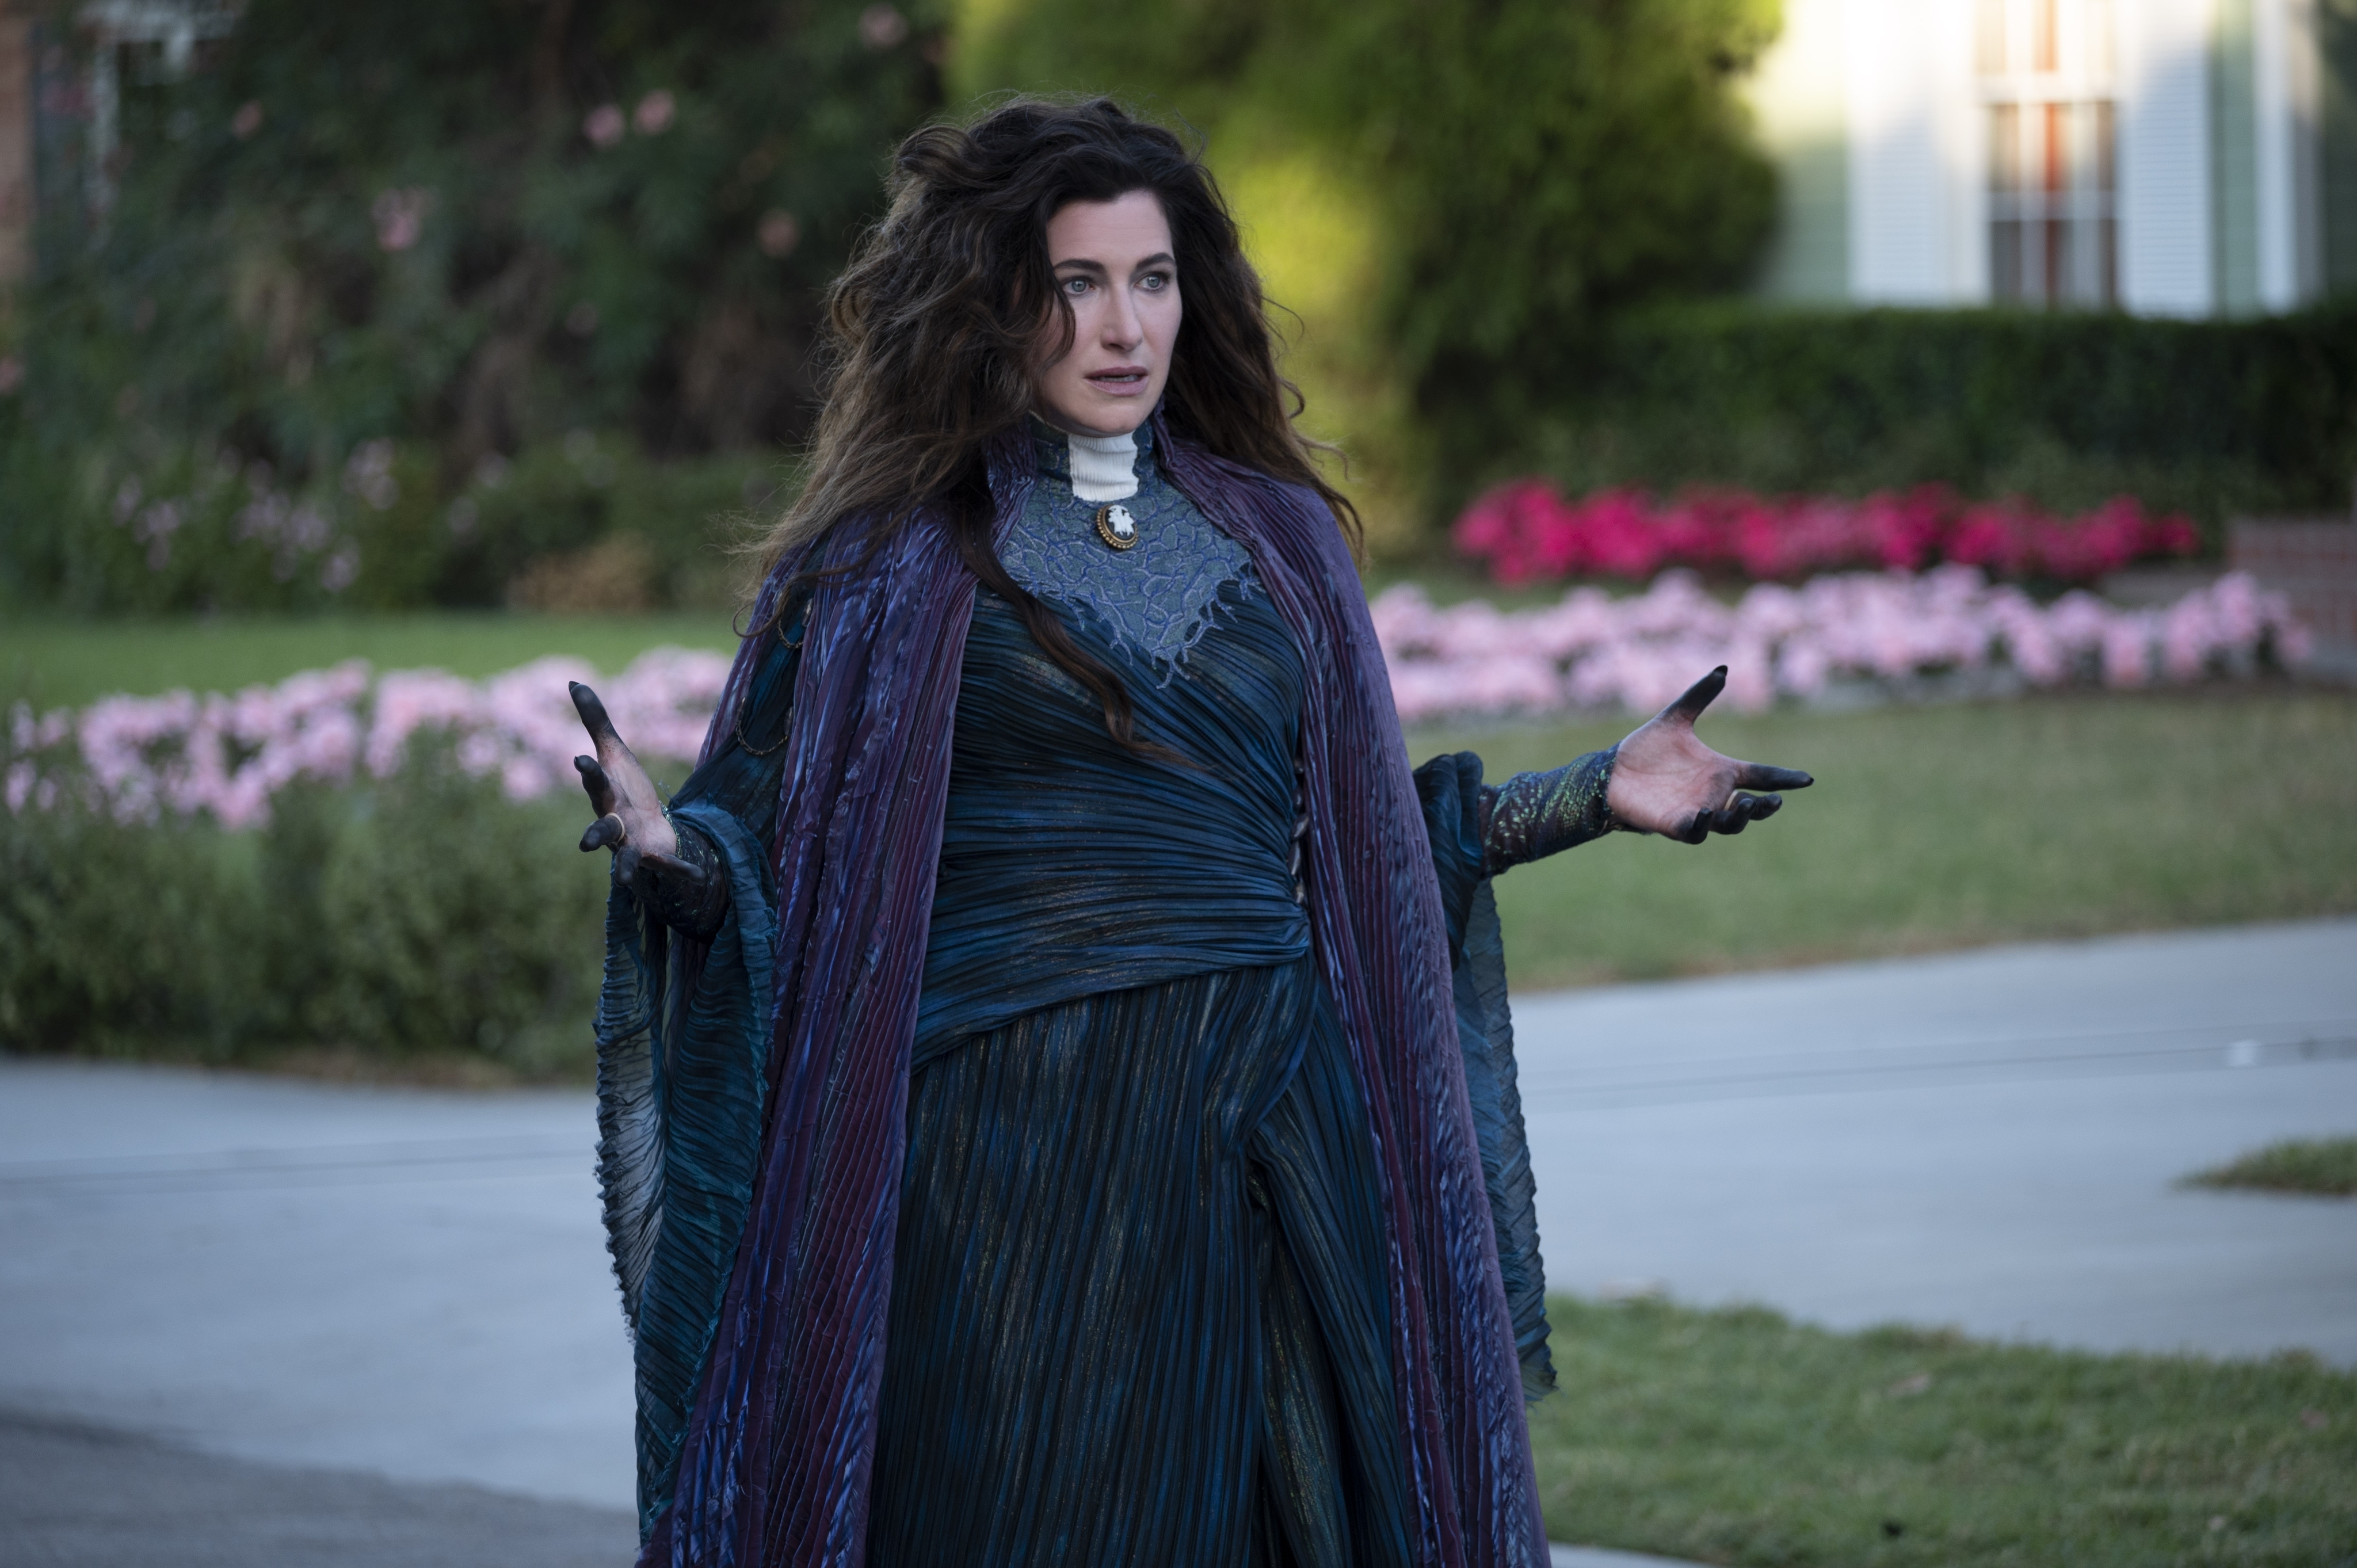 Emmy nominee Kathryn Hahn on the making of Agatha and what she really thinks of the WandaVision finale